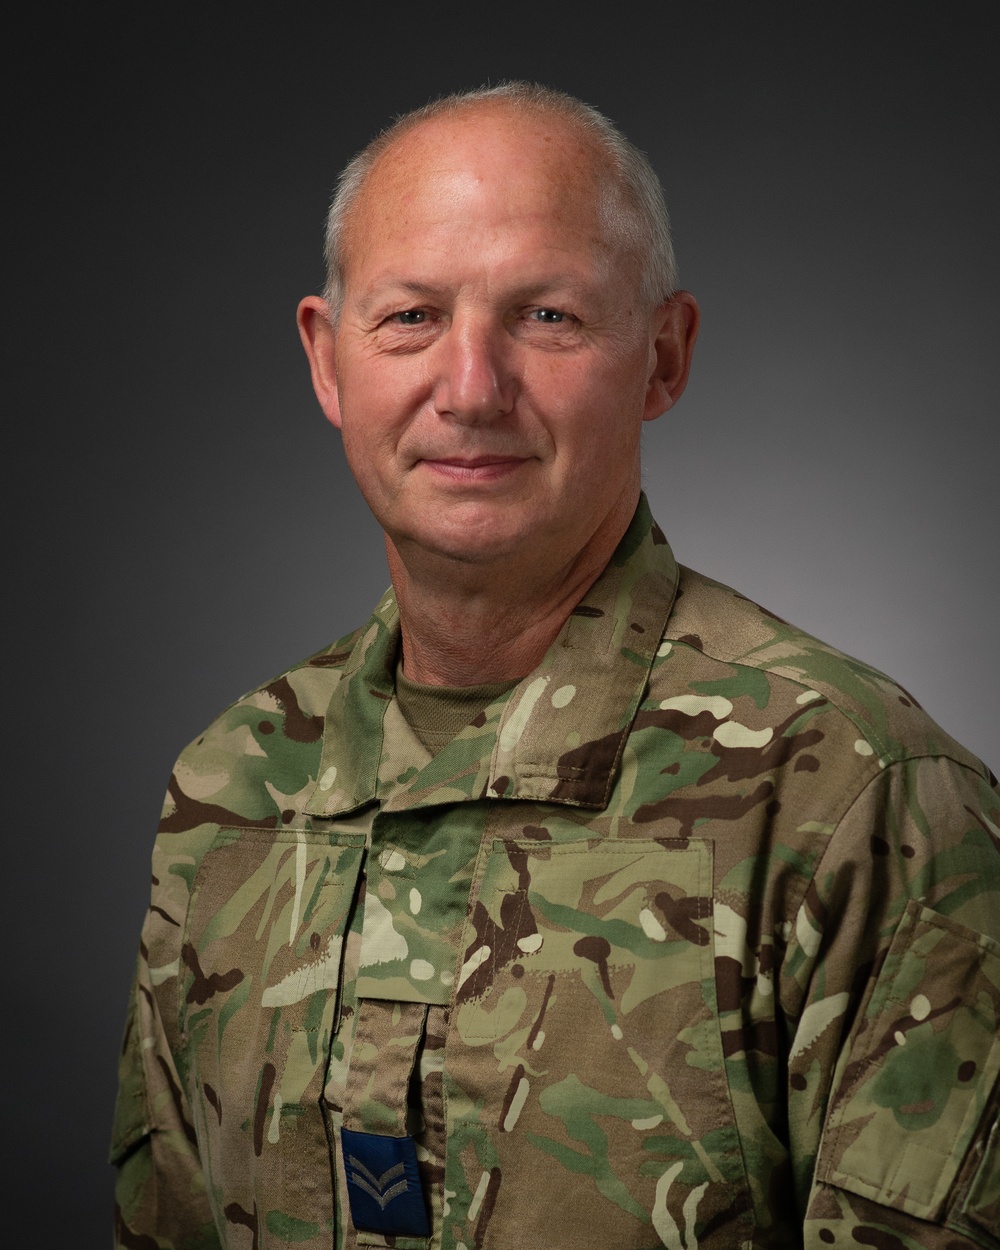 Corporal Graham B. Bufton is assigned to the Royal Auxiliary Air Force, 4624 Air Movement Squadron, Oxfordshire, U.K., and his specialty is a JNOC aircraft movement specialist.